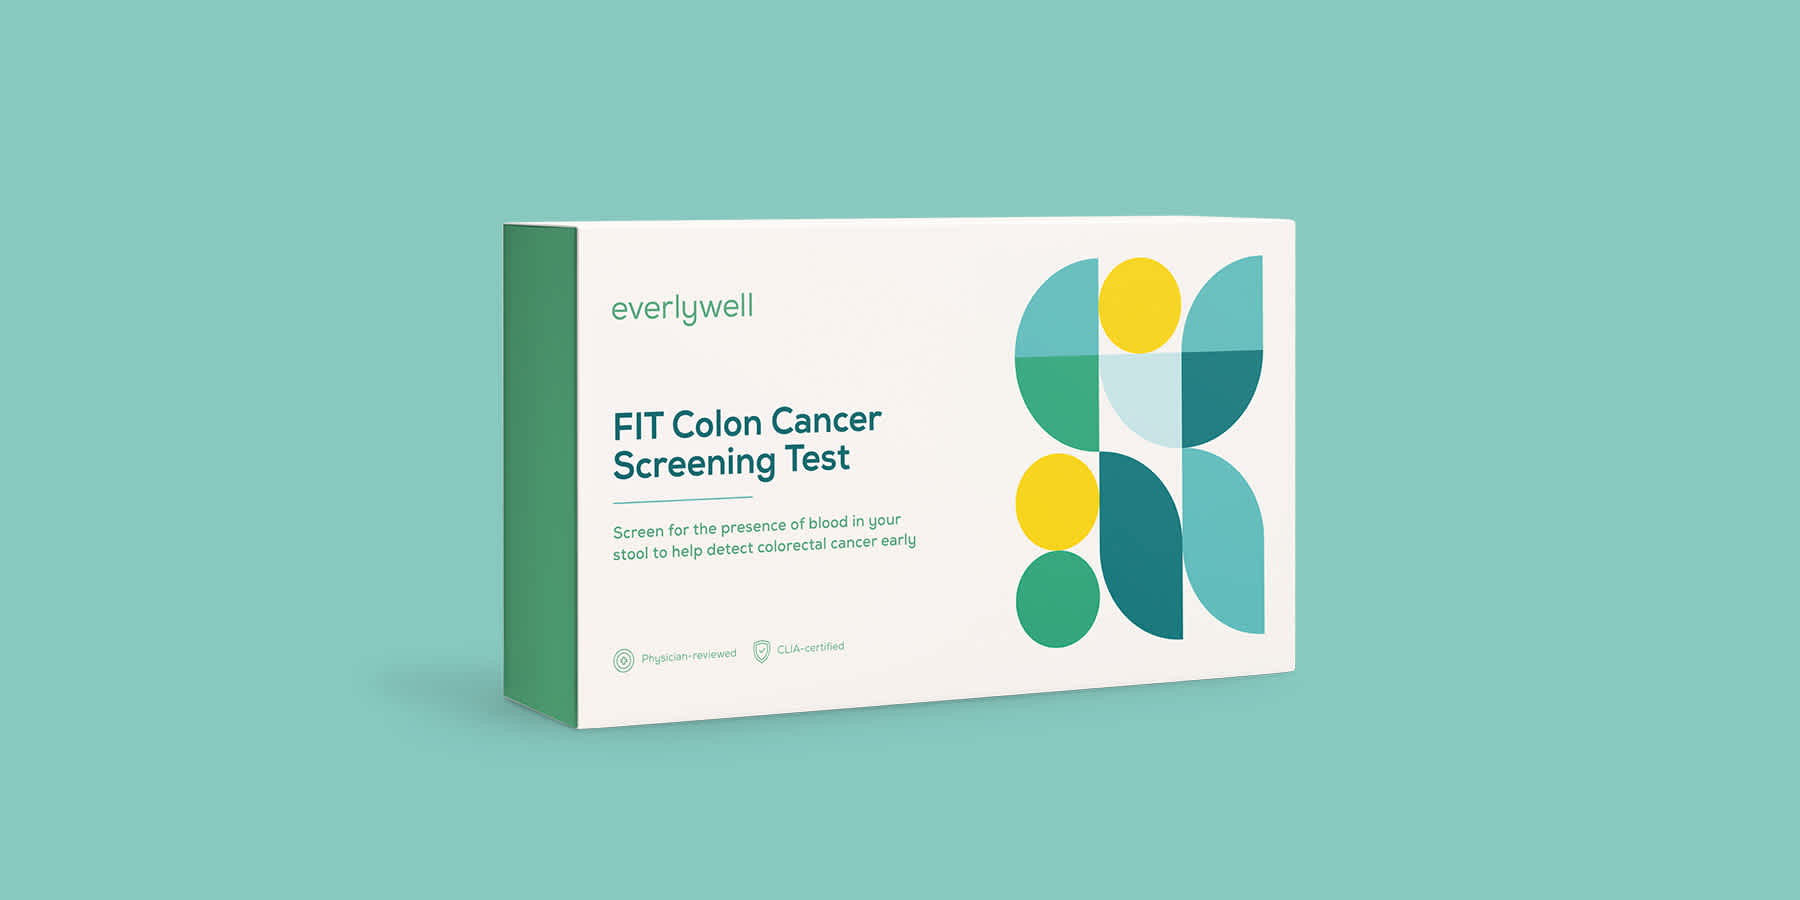 Image of FIT Colon Cancer Screening Test as a way to help with colon cancer prevention